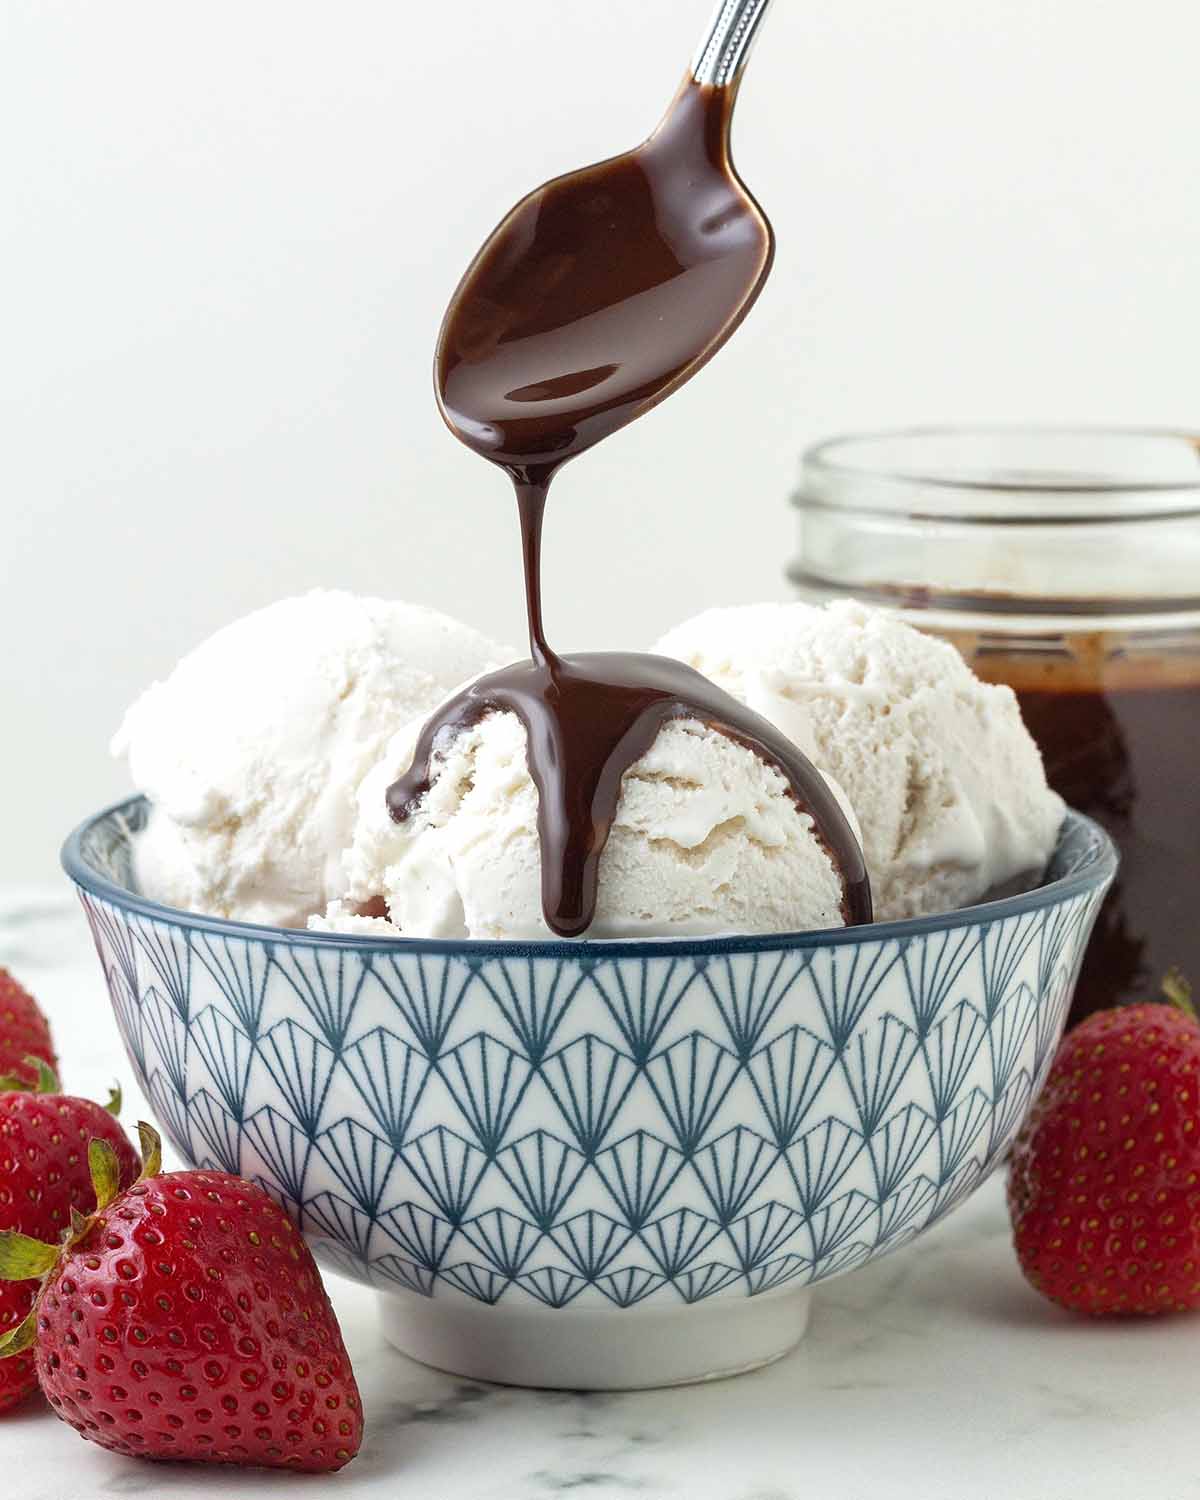 Chocolate syrup being poured from a spoon onto coconut ice cream.